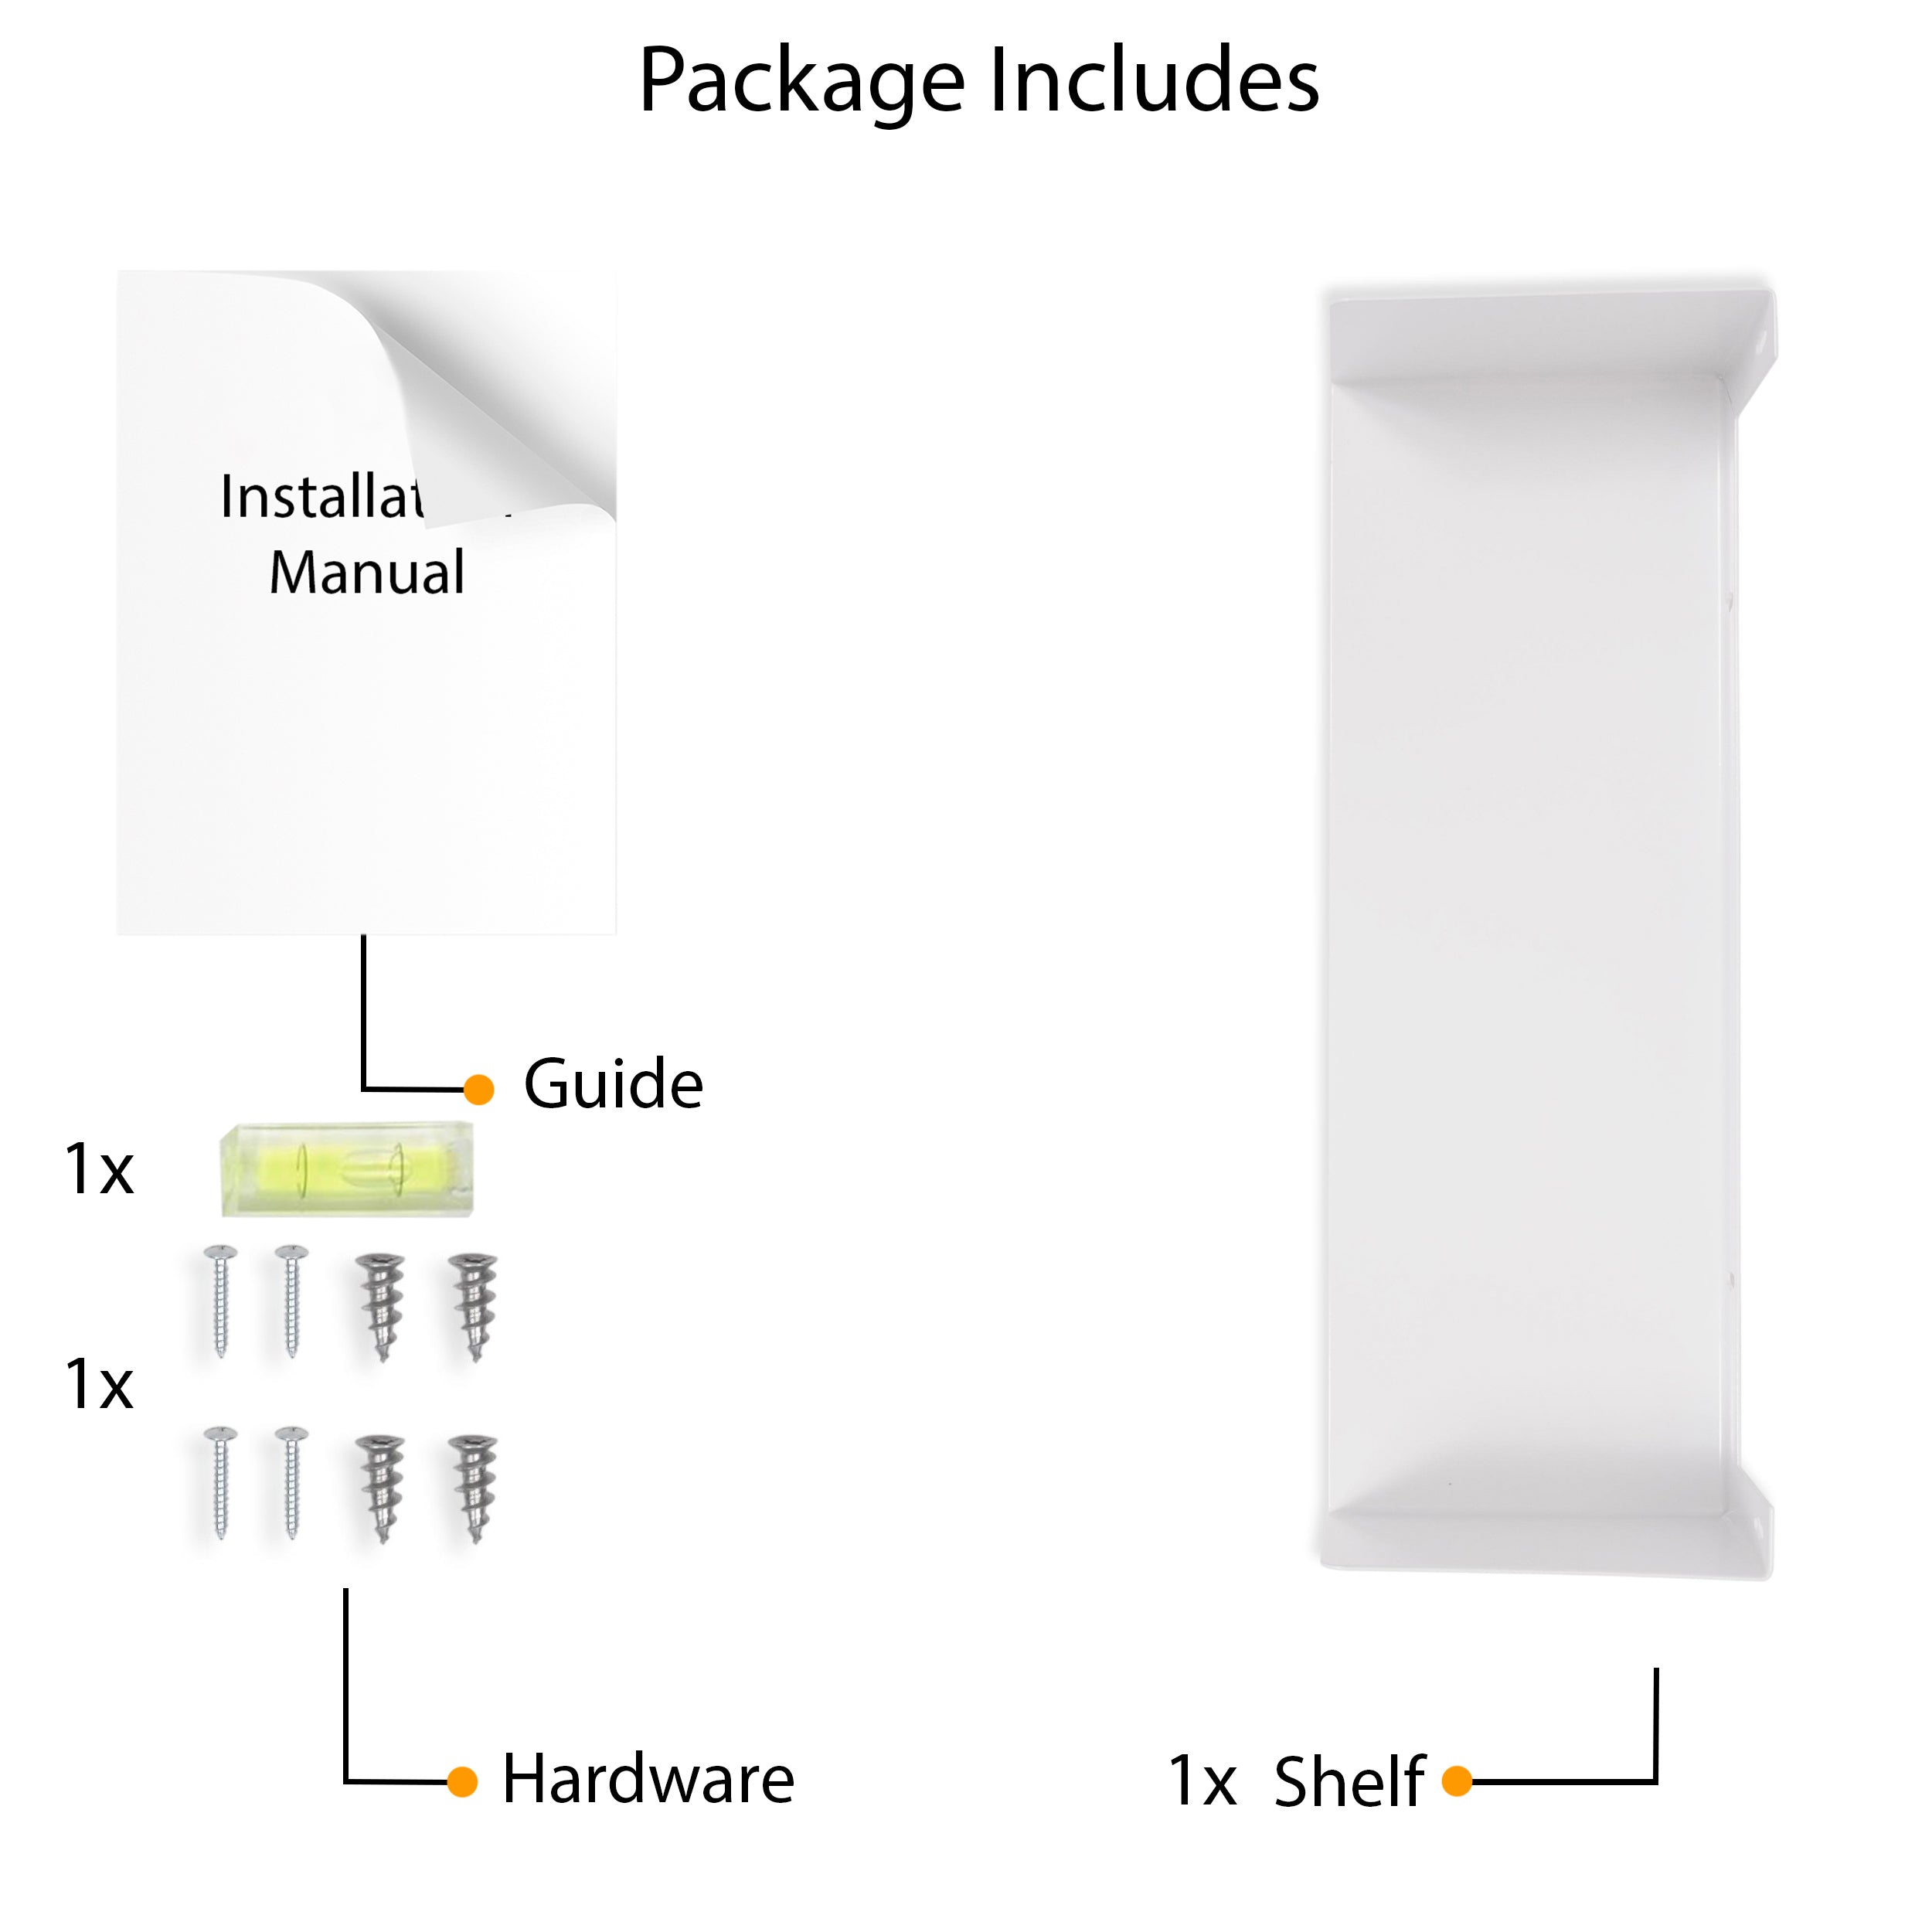 The package includes an installation manual, a guide, necessary hardware, and a metal white shelf. All you need for a hassle-free installation.